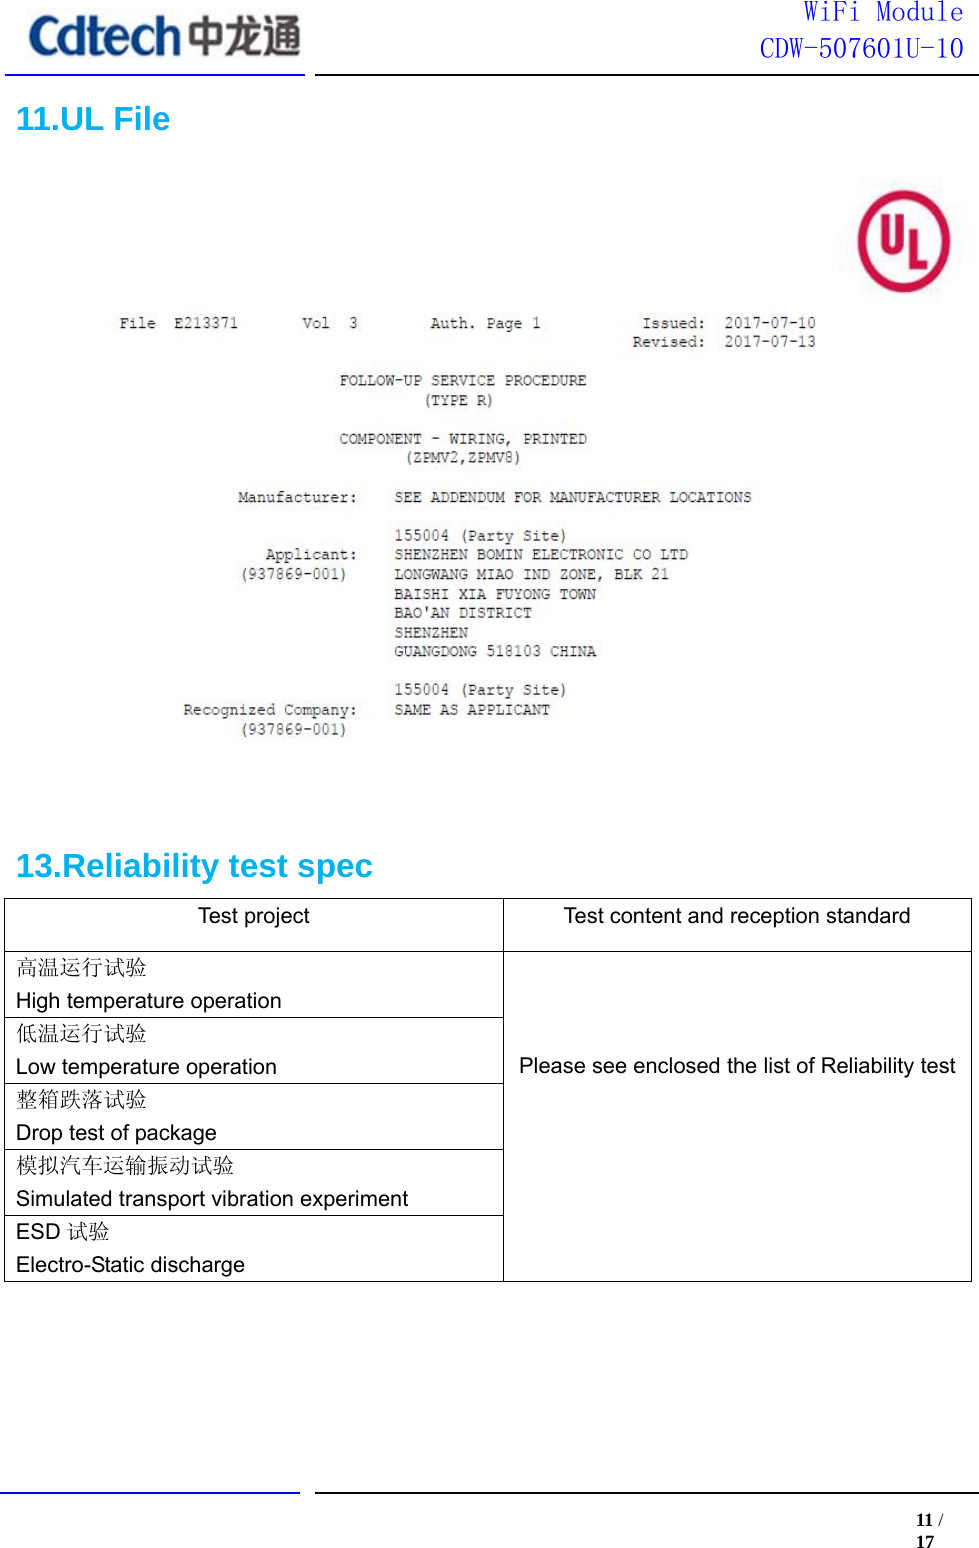 11 / 17 WiFi ModuleCDW-507601U-1011.UL File13.Reliability test specTest project  Test content and reception standard 高温运行试验High temperature operation Please see enclosed the list of Reliability test低温运行试验Low temperature operation 整箱跌落试验Drop test of package 模拟汽车运输振动试验Simulated transport vibration experiment ESD 试验 Electro-Static discharge 